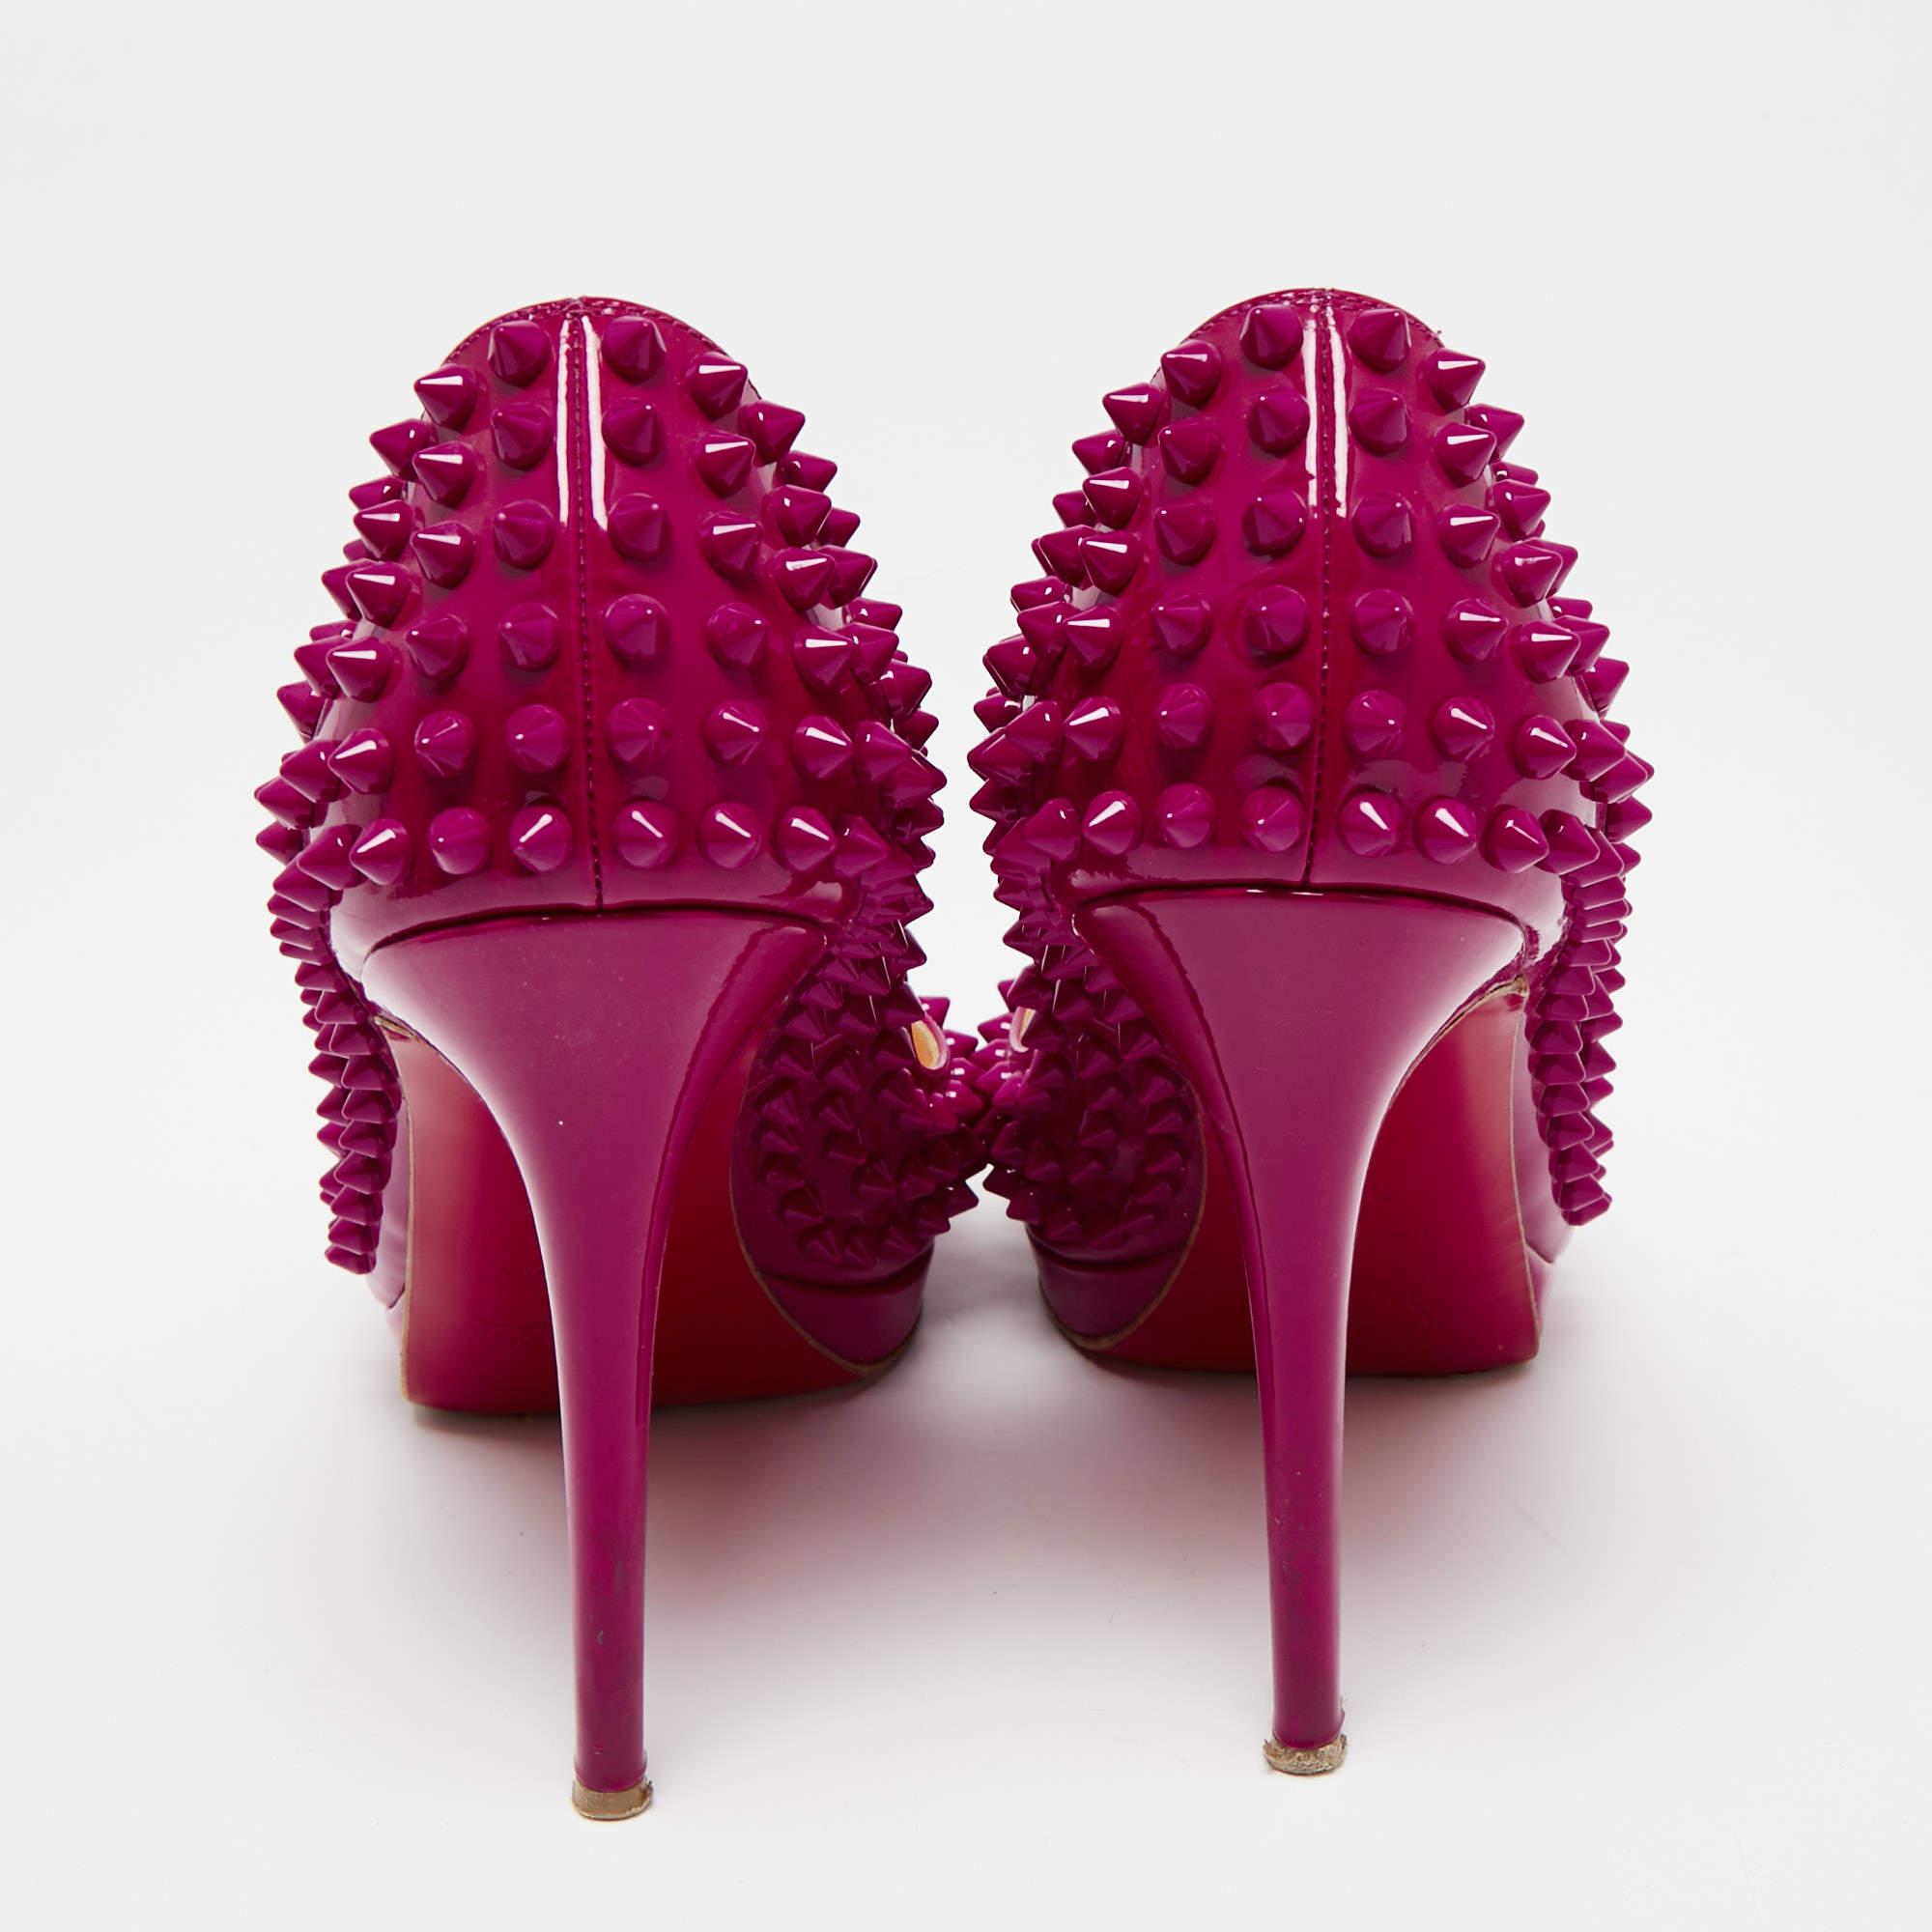 Christian Louboutin Hot Pink Patent Yolanda Spiked Peep-Toe Pumps Size 38.5 In Good Condition For Sale In Dubai, Al Qouz 2